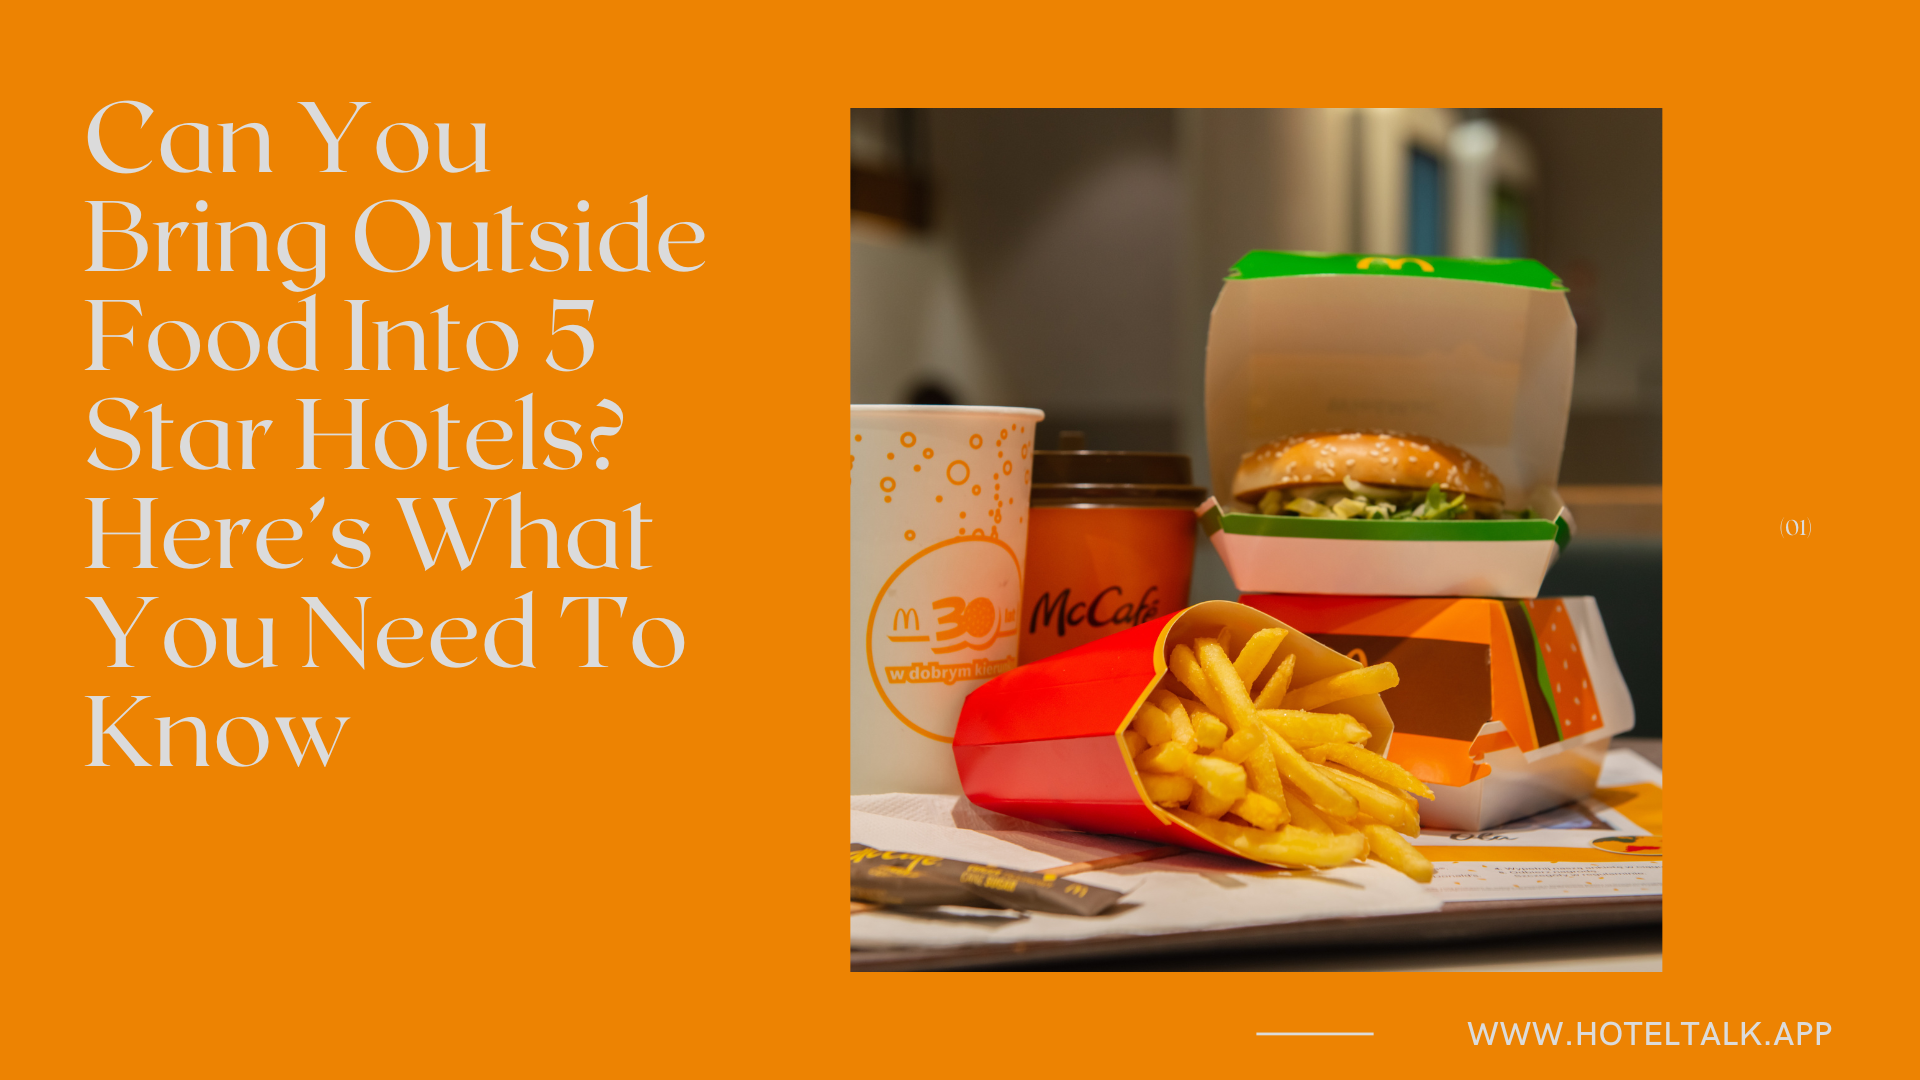 Can You Bring Outside Food Into 5 Star Hotels Here’s What You Need To Know